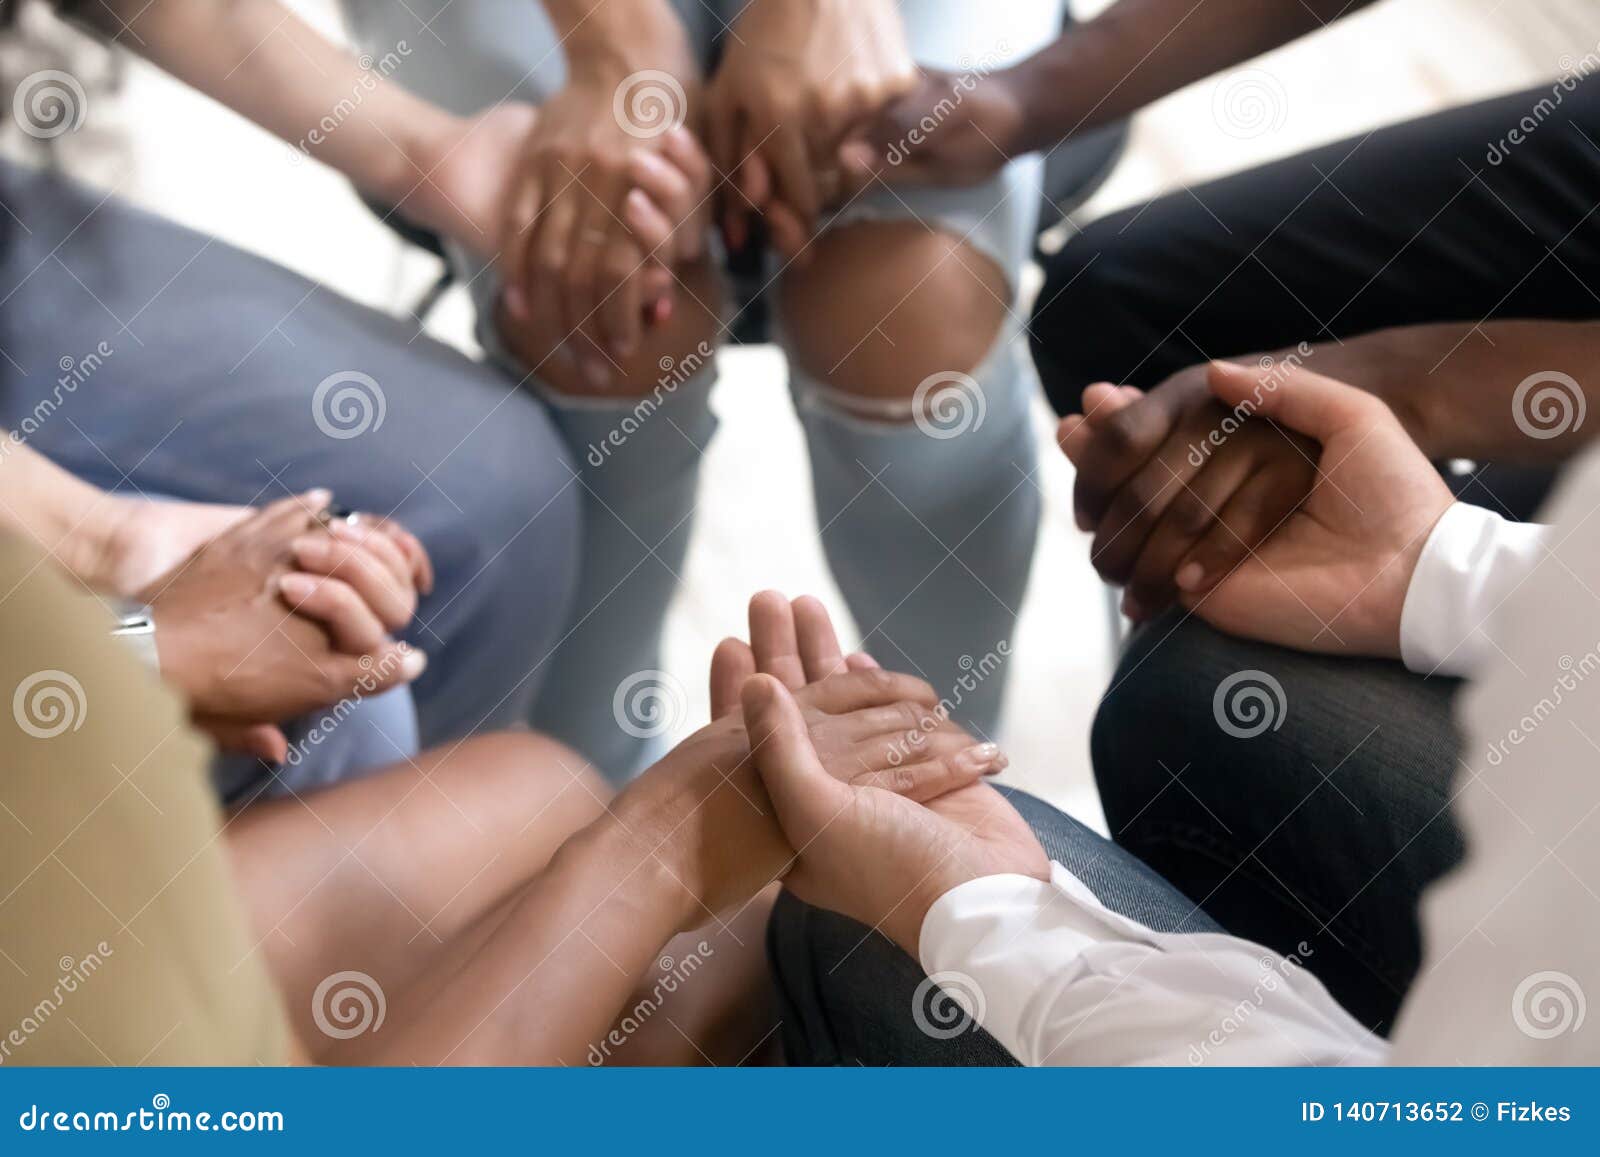 diverse people sitting in circle holding hands at group therapy